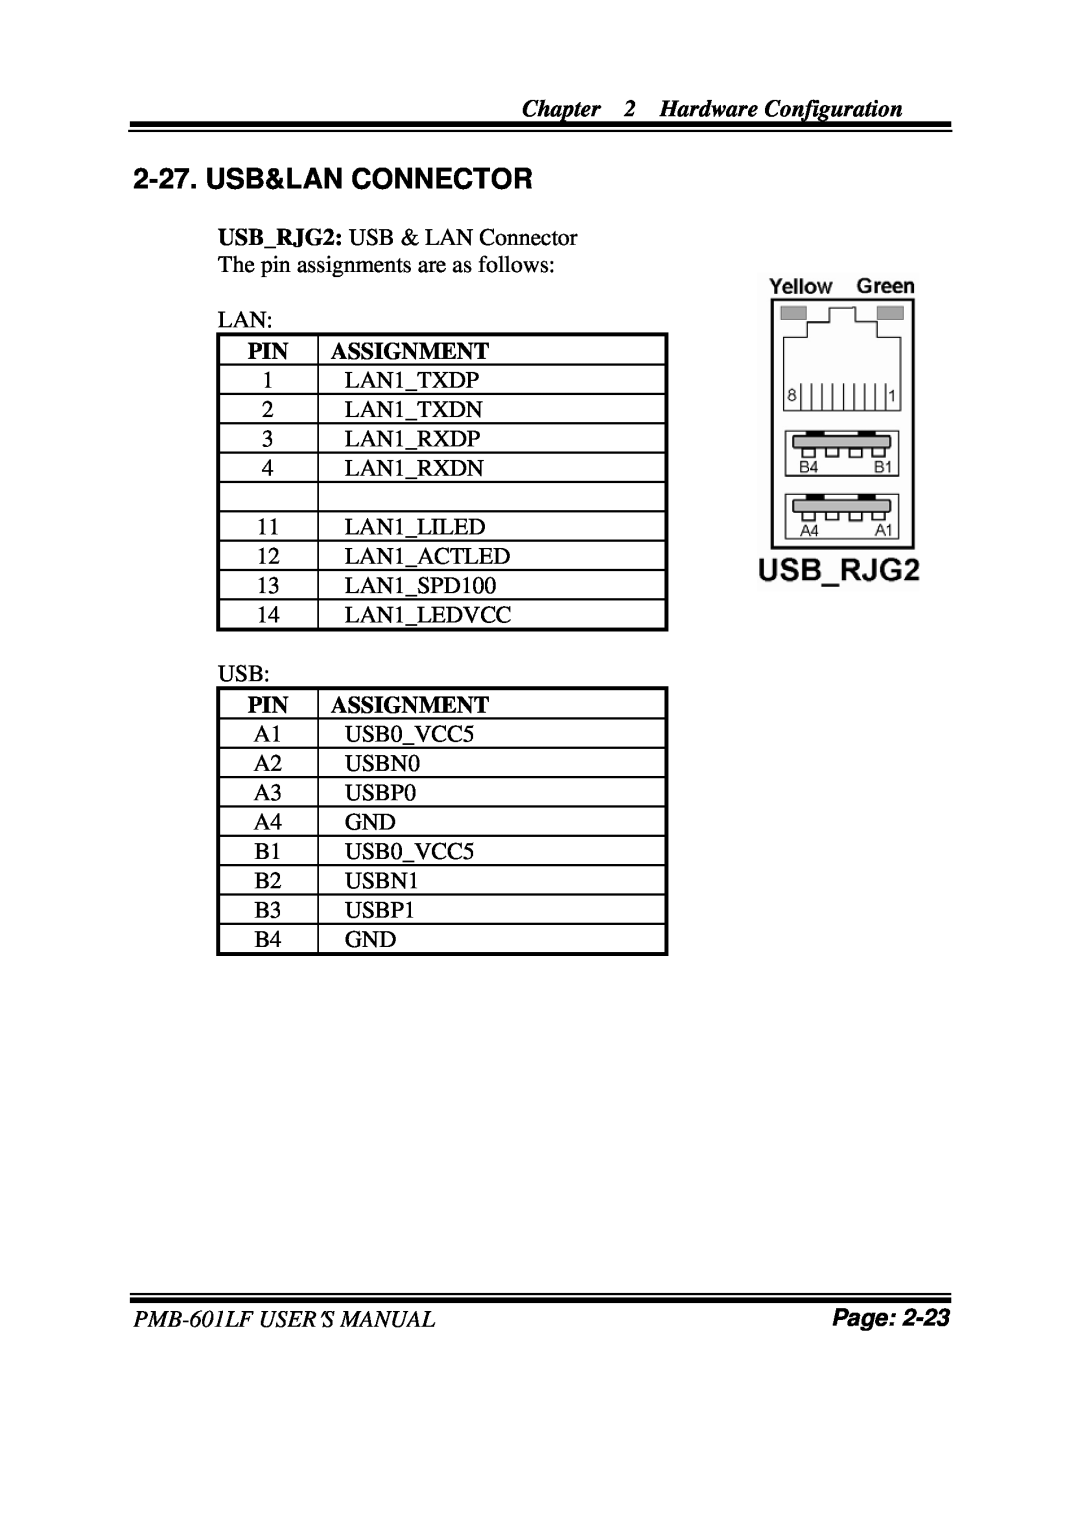 Intel user manual 2-27.USB&LAN CONNECTOR, Hardware Configuration, Assignment, PMB-601LFUSER′S MANUAL, Page 